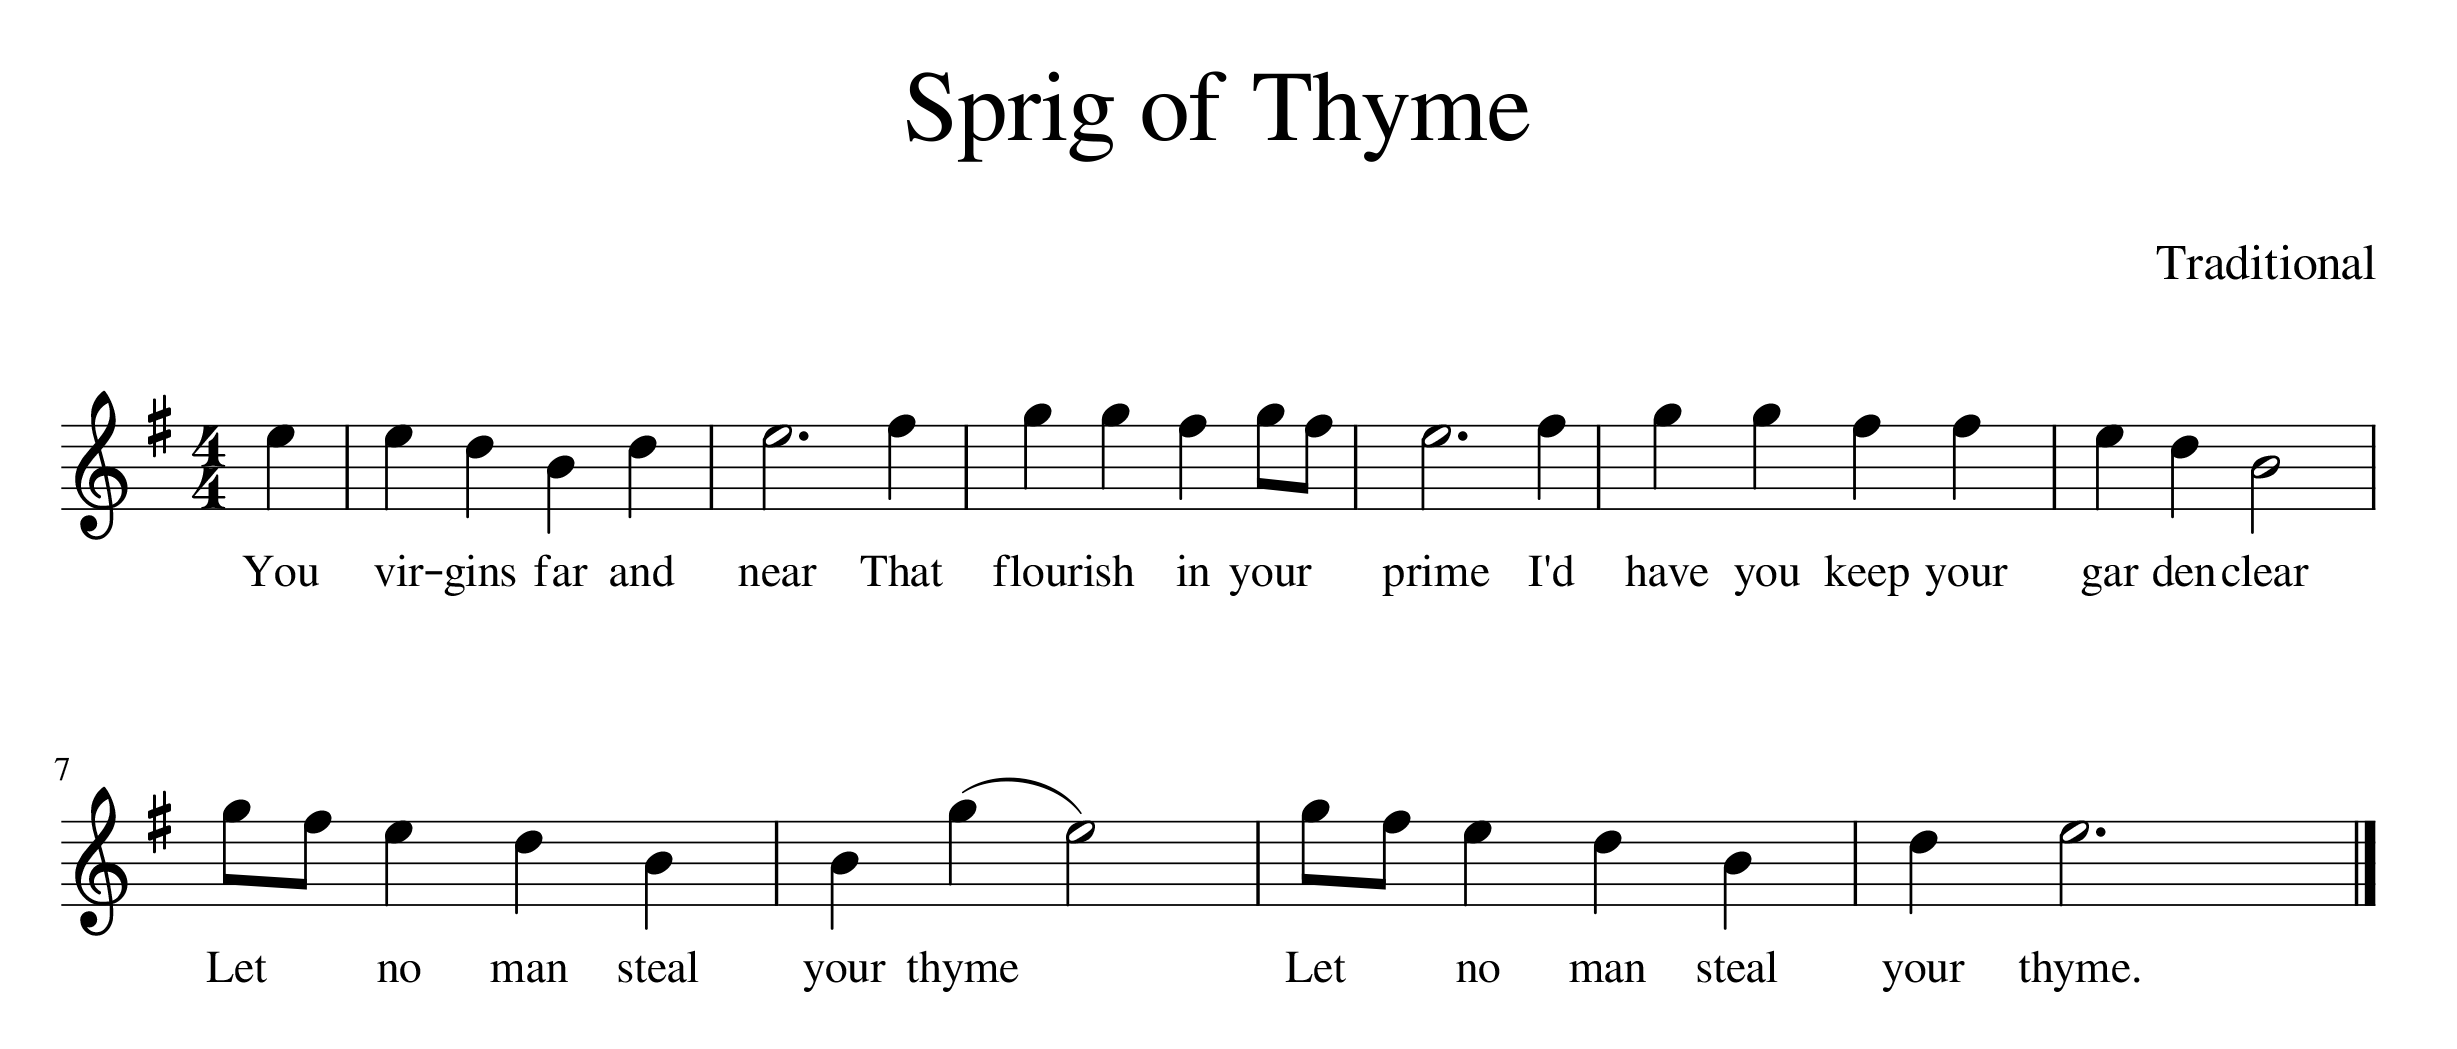 "Sprig of Thyme" sheet music